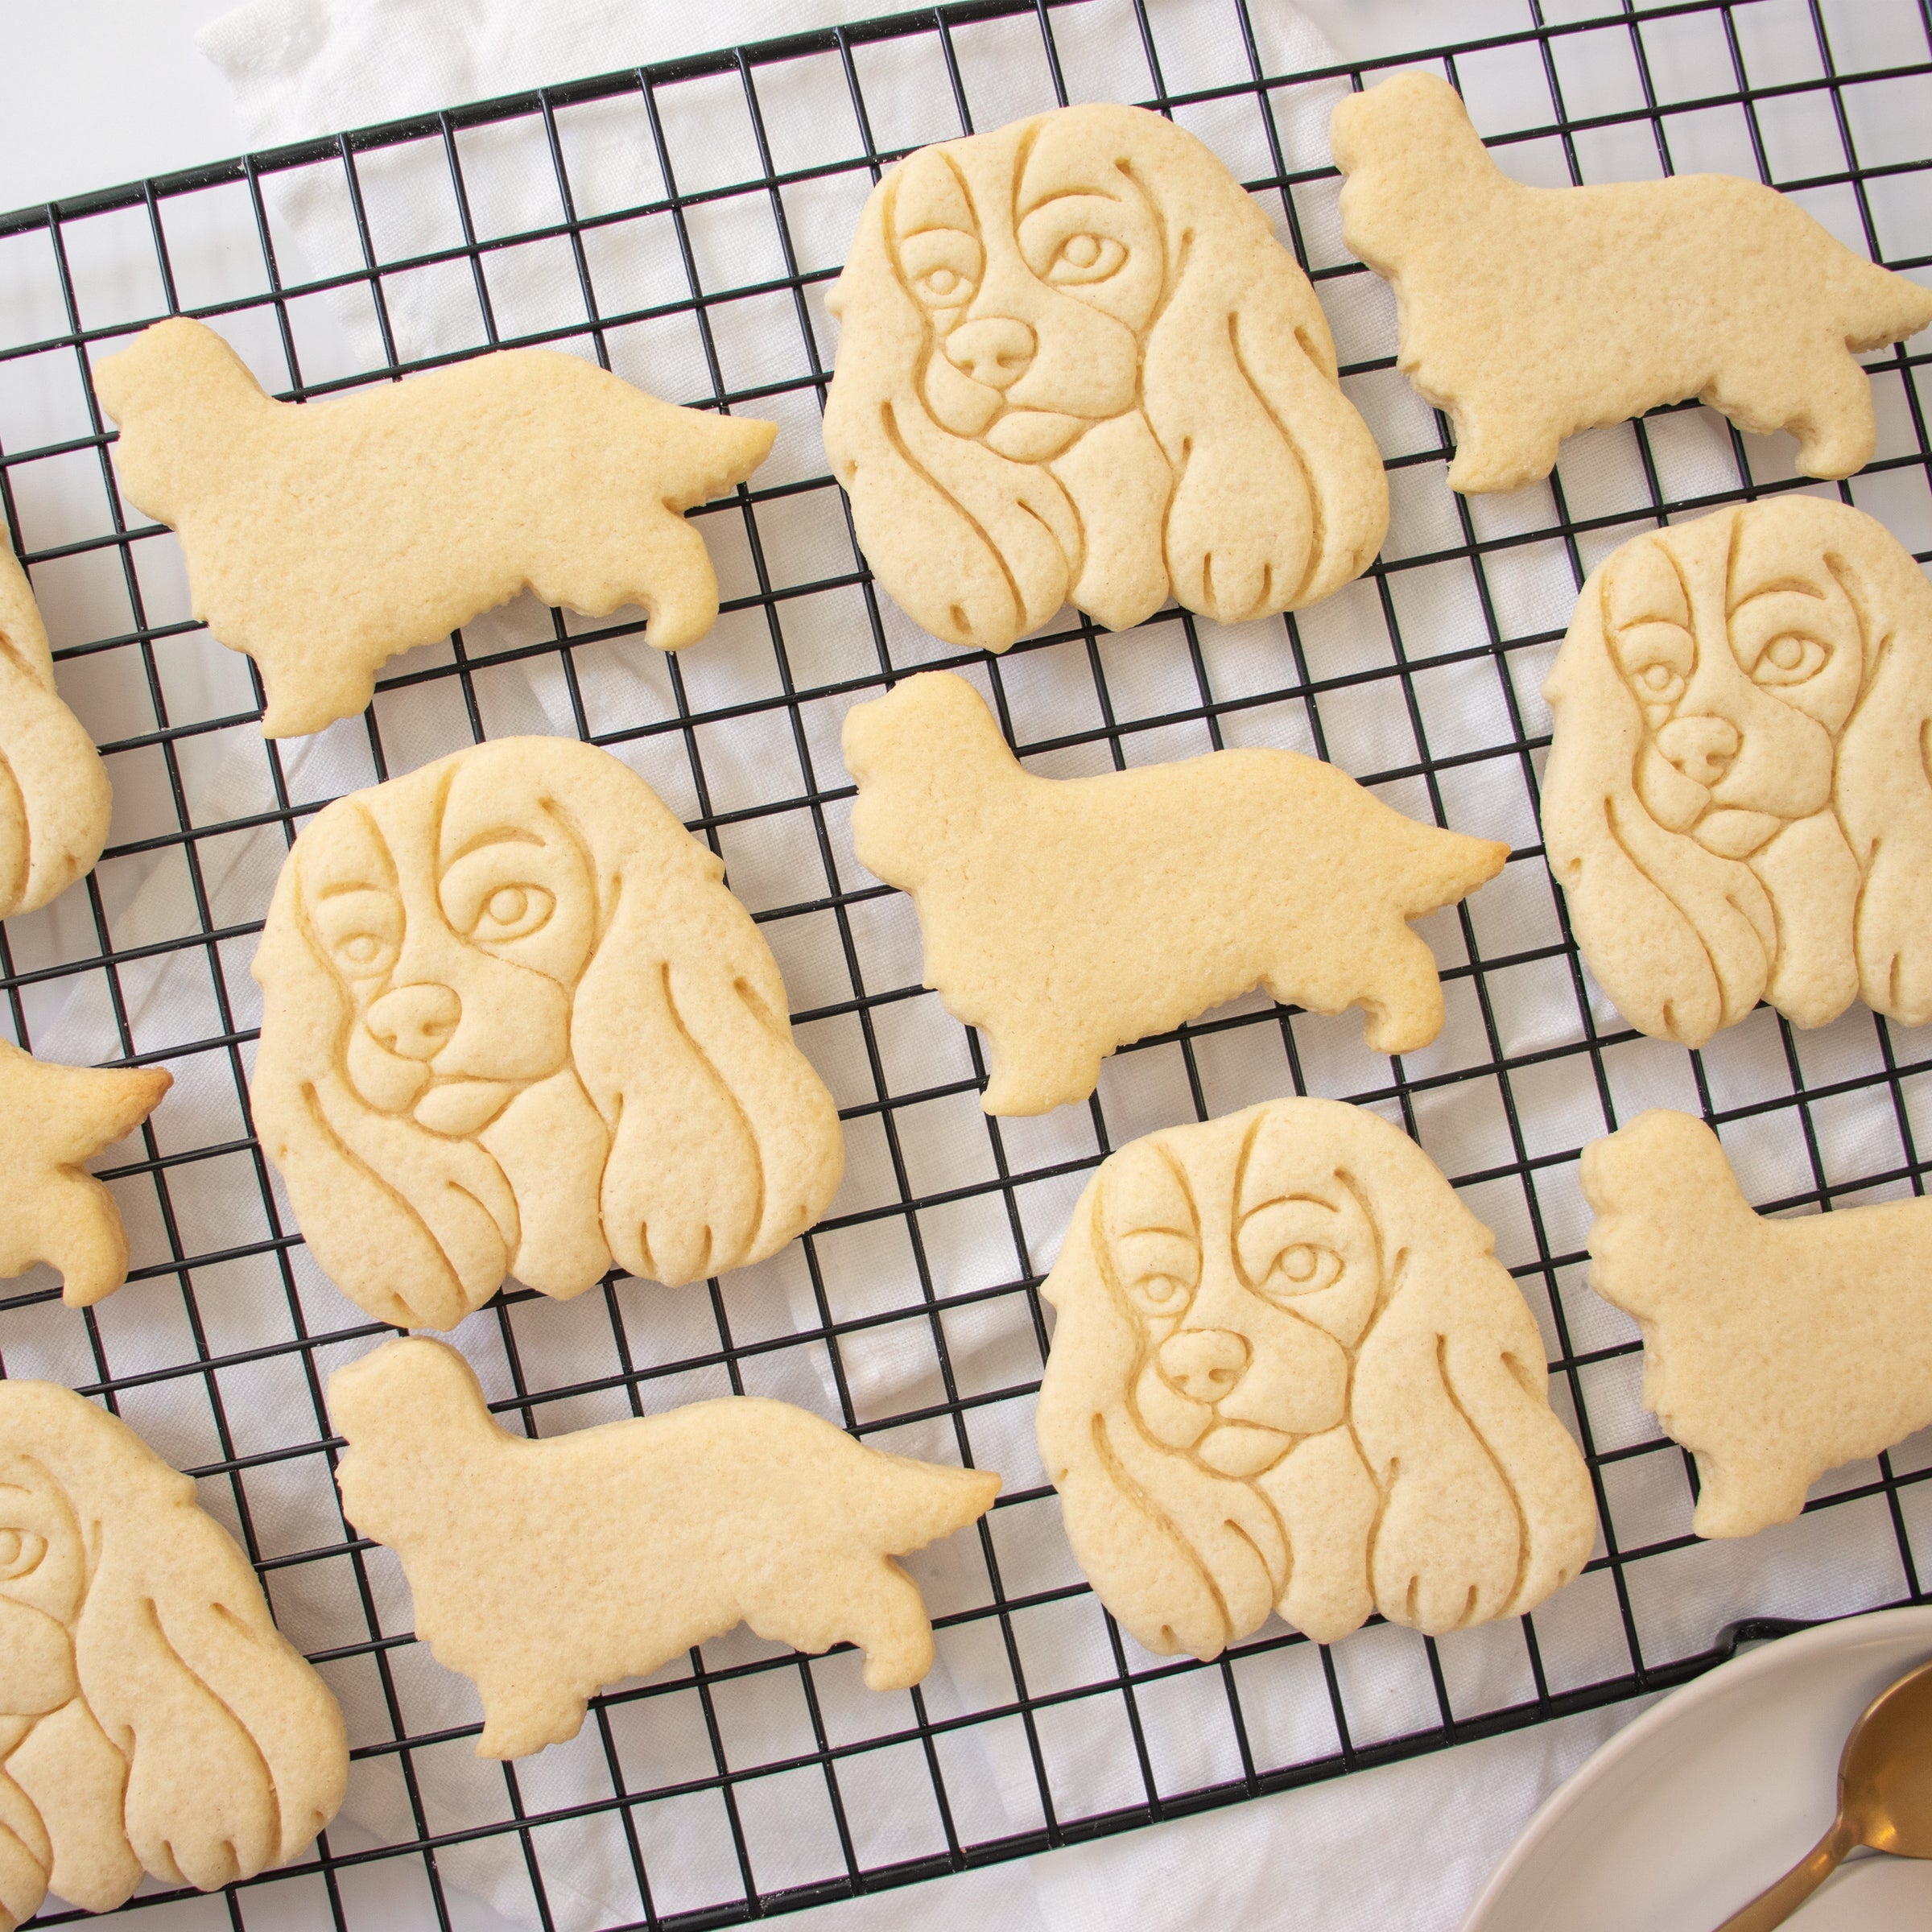 king charles portrait face and silhouette cookies